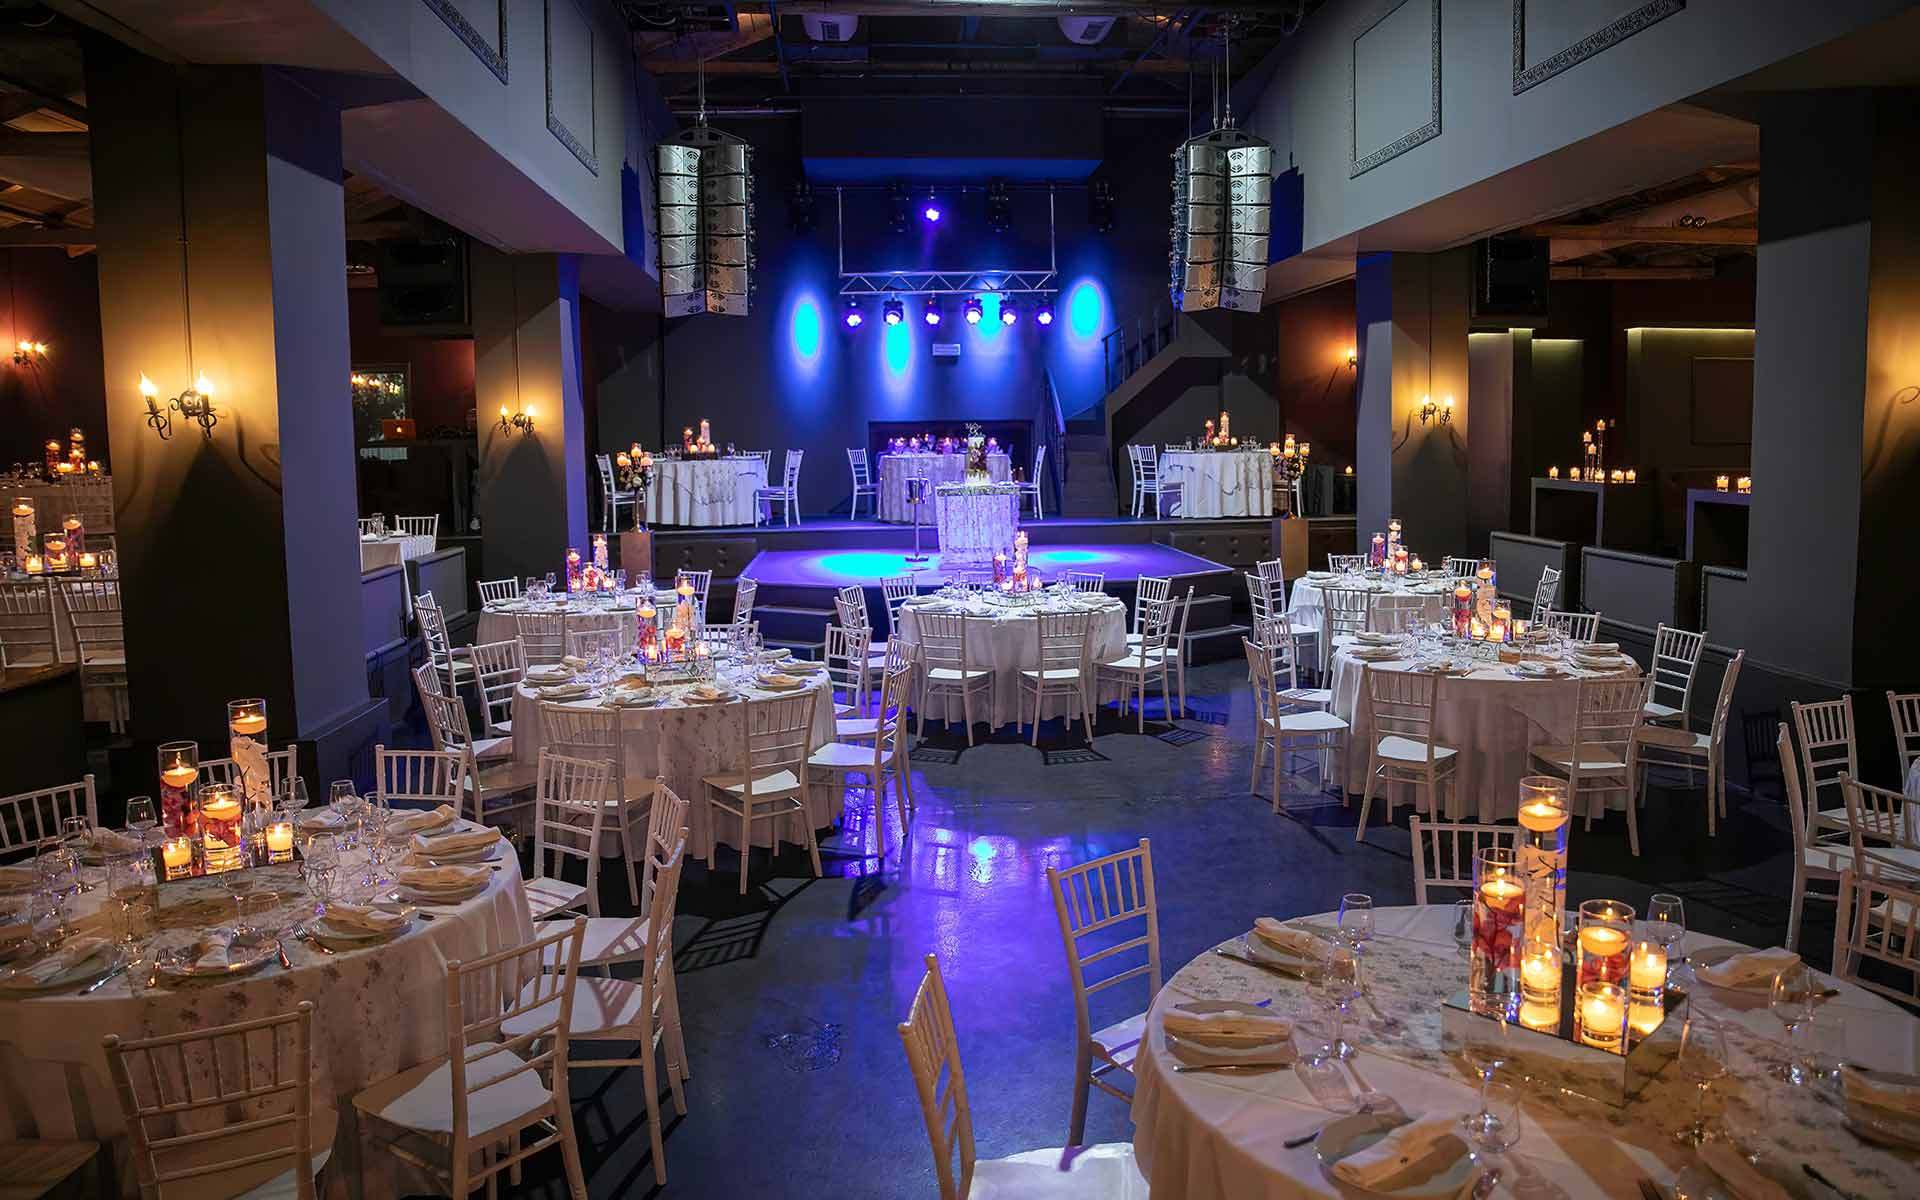 Apotheosis-live-stage-wedding-venue-set-up-by-Diamond-Events-planning-services